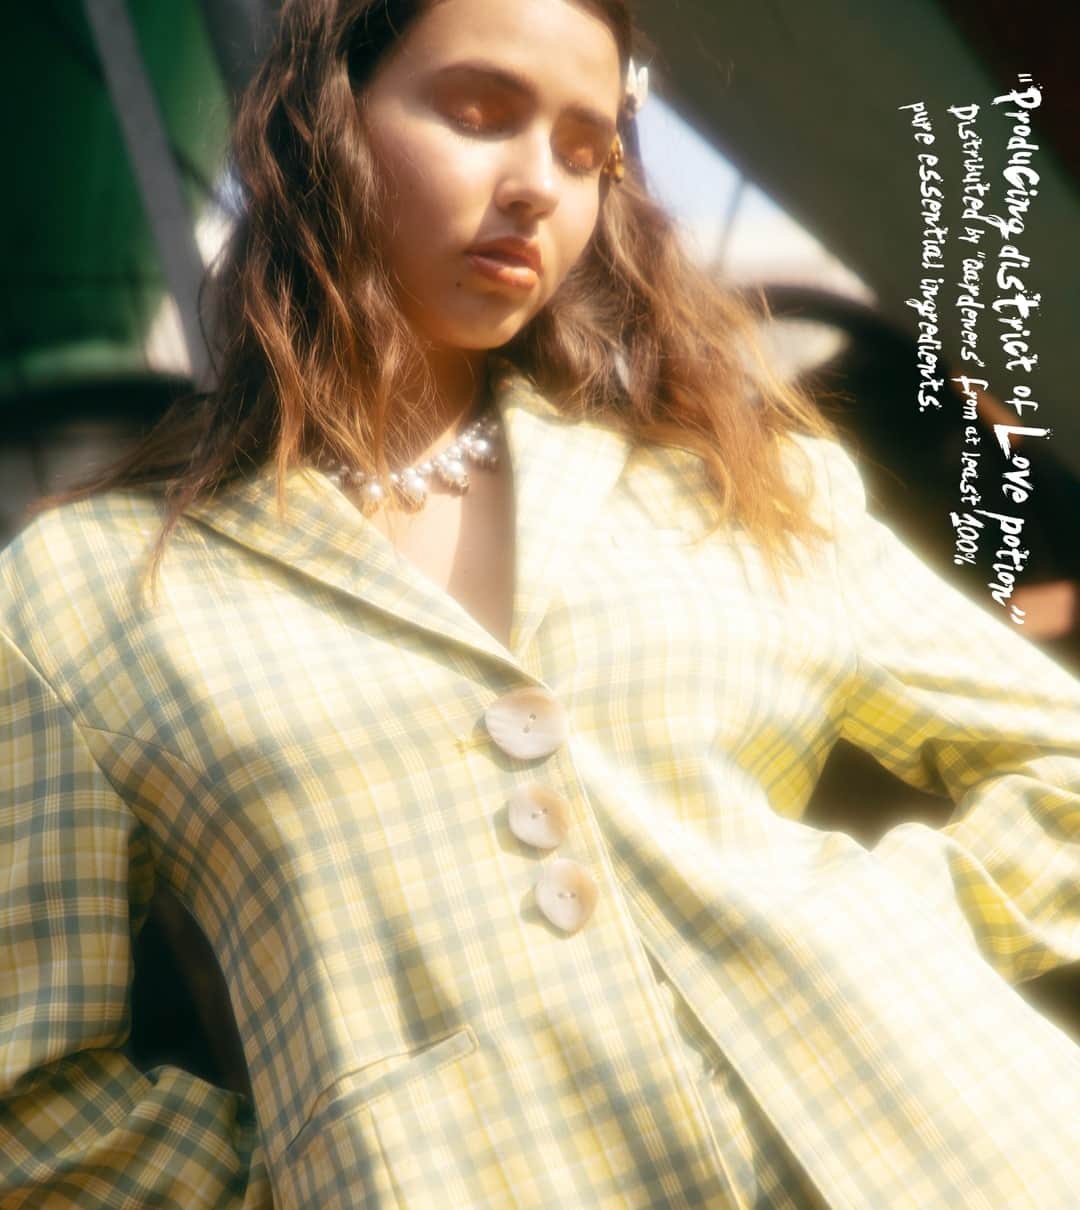 QUSSIO RTW from Tokyoのインスタグラム：「New collection⠀⠀⠀⠀⠀⠀⠀⠀⠀⠀⠀⠀⠀⠀⠀⠀⠀⠀⠀⠀⠀⠀⠀⠀⠀⠀⠀⠀⠀⠀⠀⠀⠀⠀⠀⠀⠀⠀⠀⠀⠀⠀⠀⠀⠀⠀⠀⠀⠀⠀⠀⠀⠀⠀ Tomorrow 20:00 at online💕⠀⠀⠀⠀⠀⠀⠀⠀⠀⠀⠀⠀⠀⠀⠀⠀⠀⠀⠀⠀⠀⠀⠀⠀⠀⠀⠀⠀⠀⠀⠀⠀⠀⠀⠀⠀ .⠀⠀⠀⠀⠀⠀⠀⠀⠀⠀⠀⠀⠀⠀⠀⠀⠀⠀⠀⠀⠀⠀⠀⠀⠀⠀⠀⠀⠀⠀⠀⠀⠀⠀⠀⠀ Check 21S/S Look book Pt.1⠀⠀⠀⠀⠀⠀⠀⠀⠀⠀⠀⠀⠀⠀⠀⠀⠀⠀⠀⠀⠀⠀⠀⠀⠀⠀⠀⠀⠀⠀⠀⠀⠀⠀⠀⠀ from Link in bio💕」